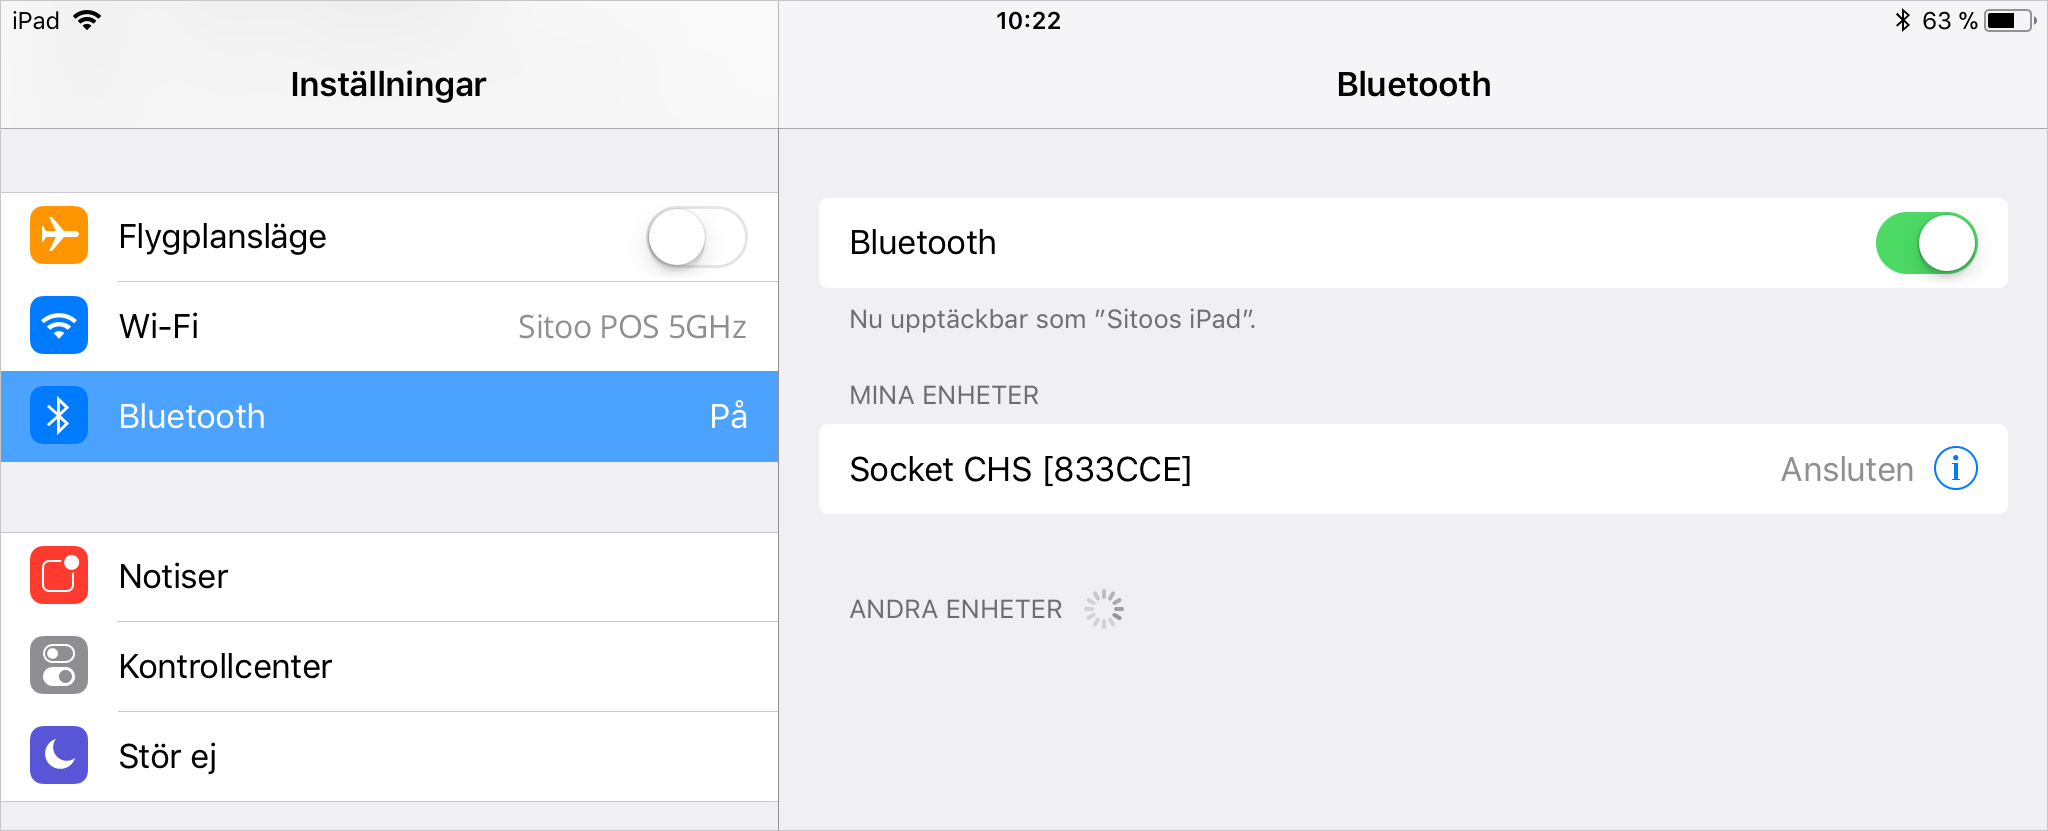 bluetooth_connected.png